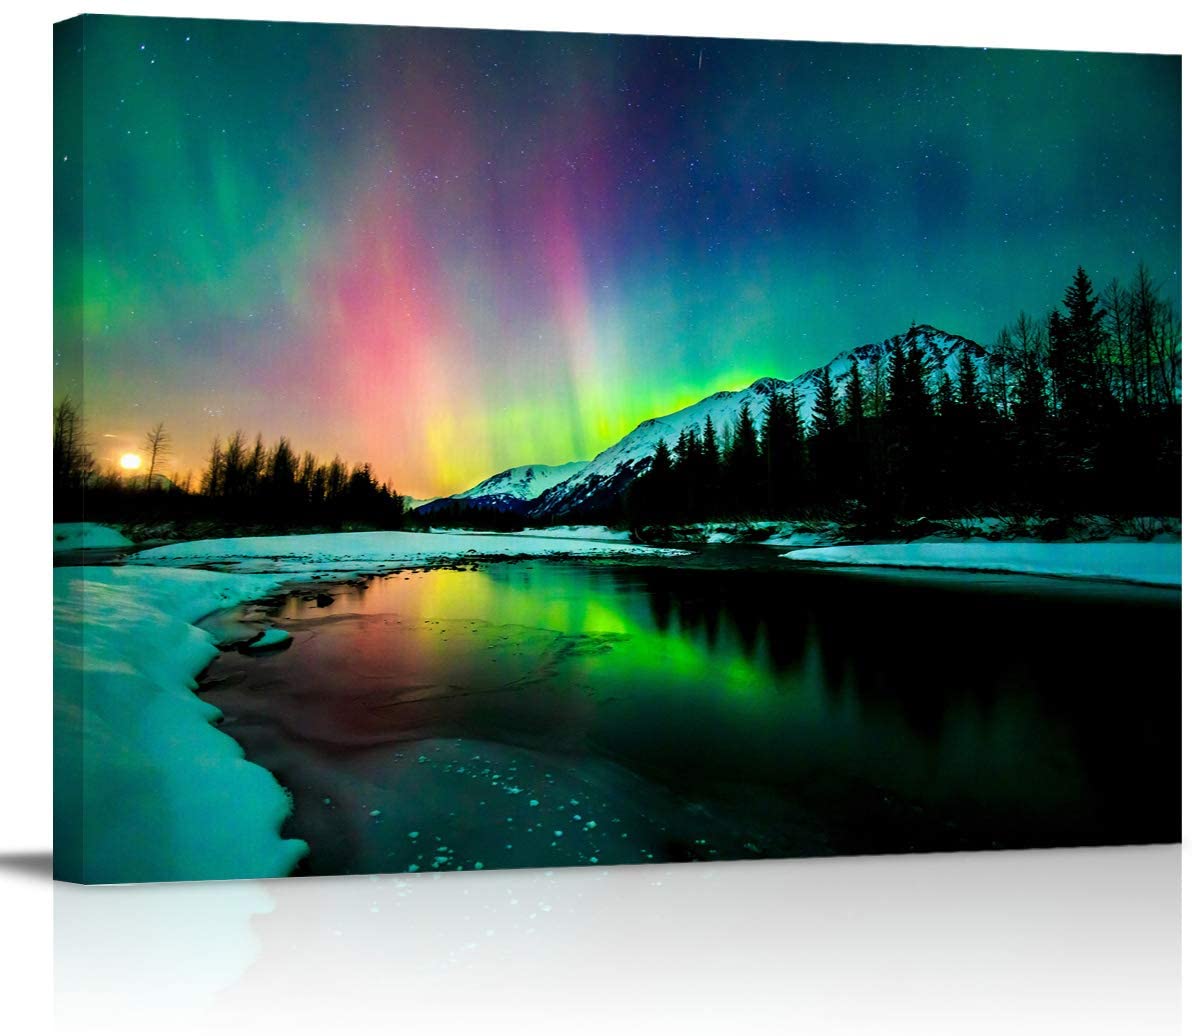 Aurora Borealis Canvas Wall Art Northern Lights Painting Landscape Artwork Home Decoration for Living Room Bedroom Framed Ready to Hang - image 1 of 1